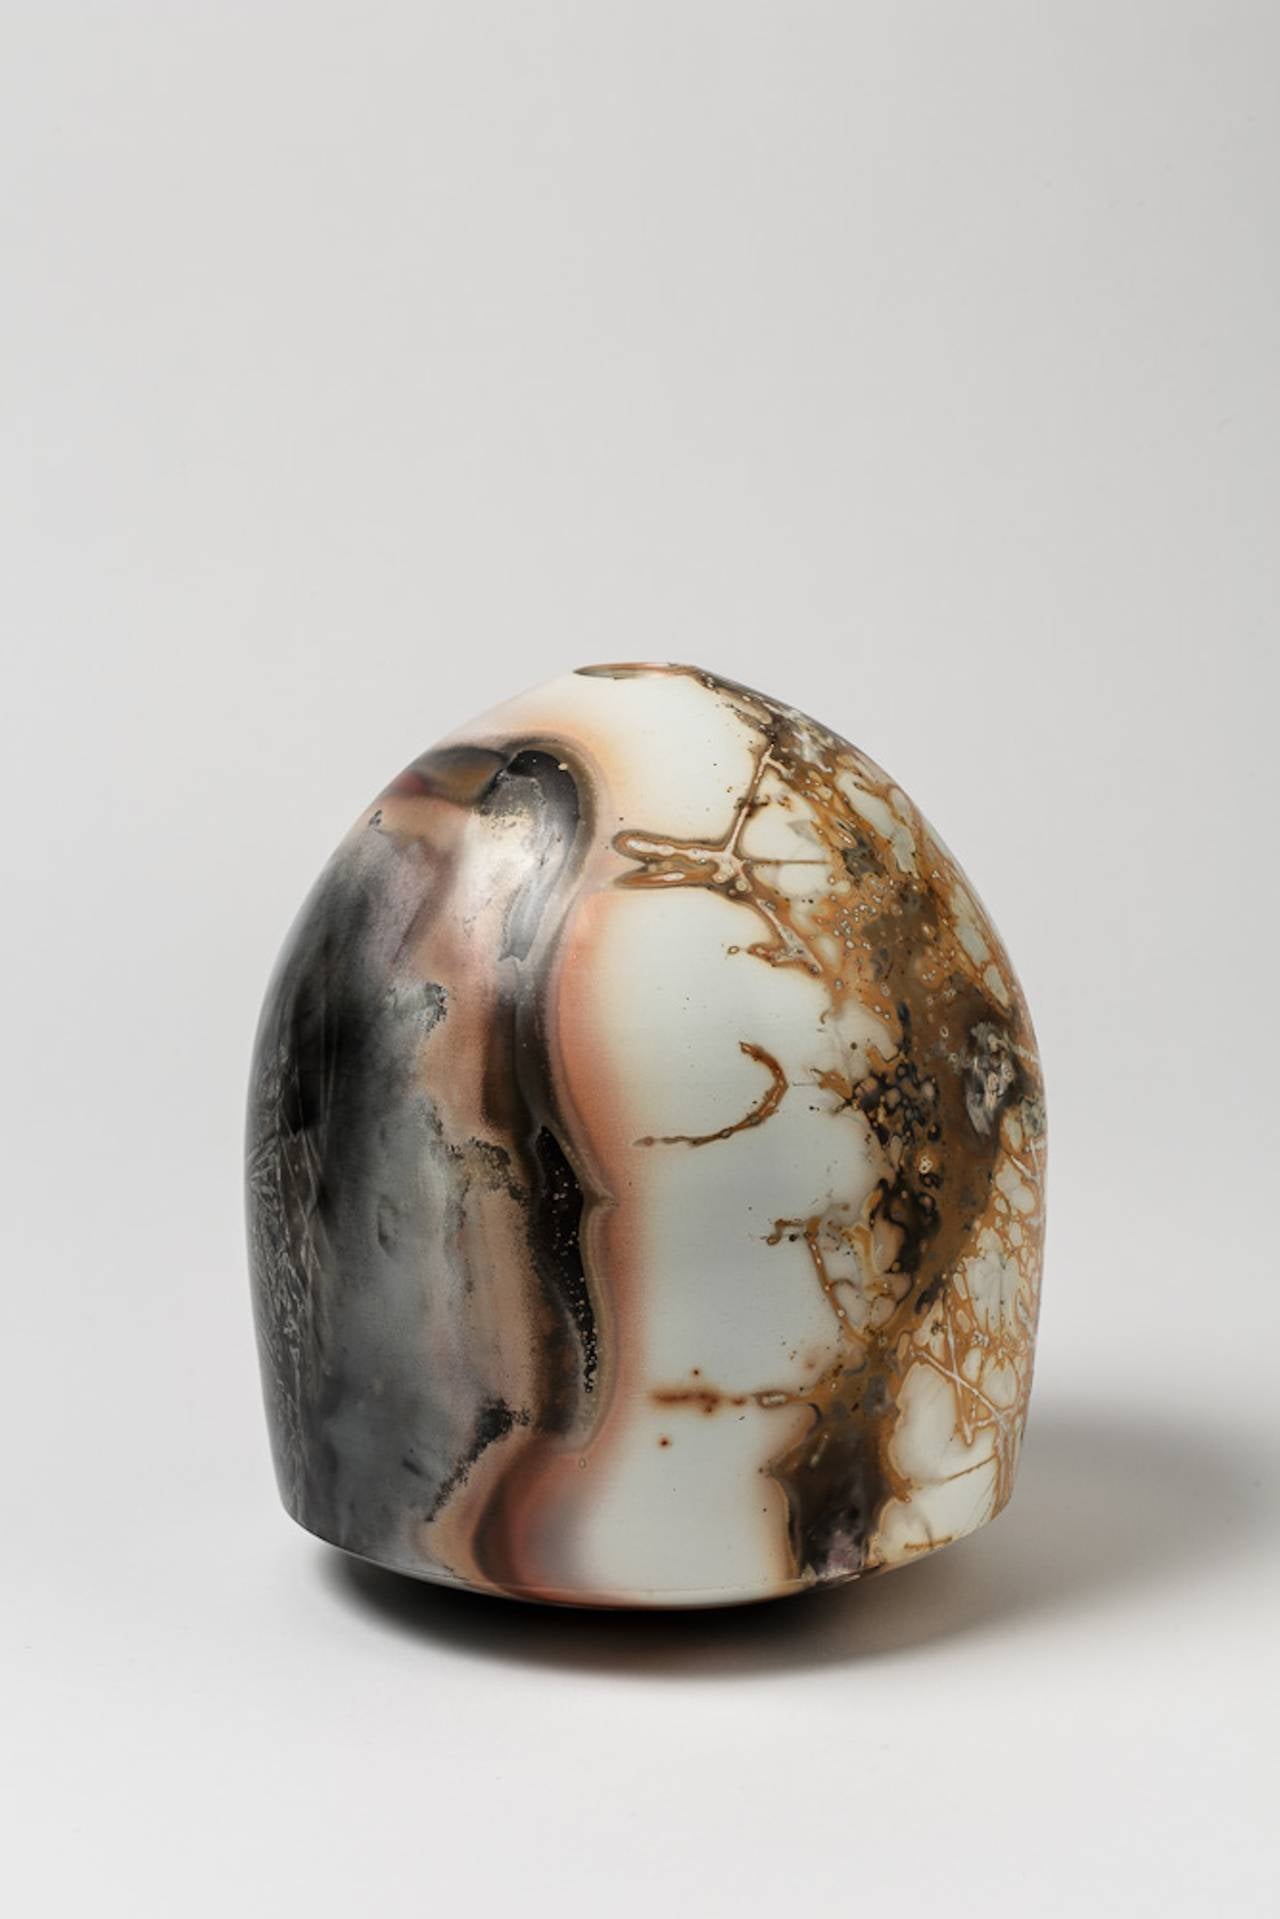 An ovoid shape ceramic vase by Alistair Danhieux, Saint-Amand-en-Puisaye.
Unique piece.
Perfect original conditions.
Signed at the base and dated 2009.